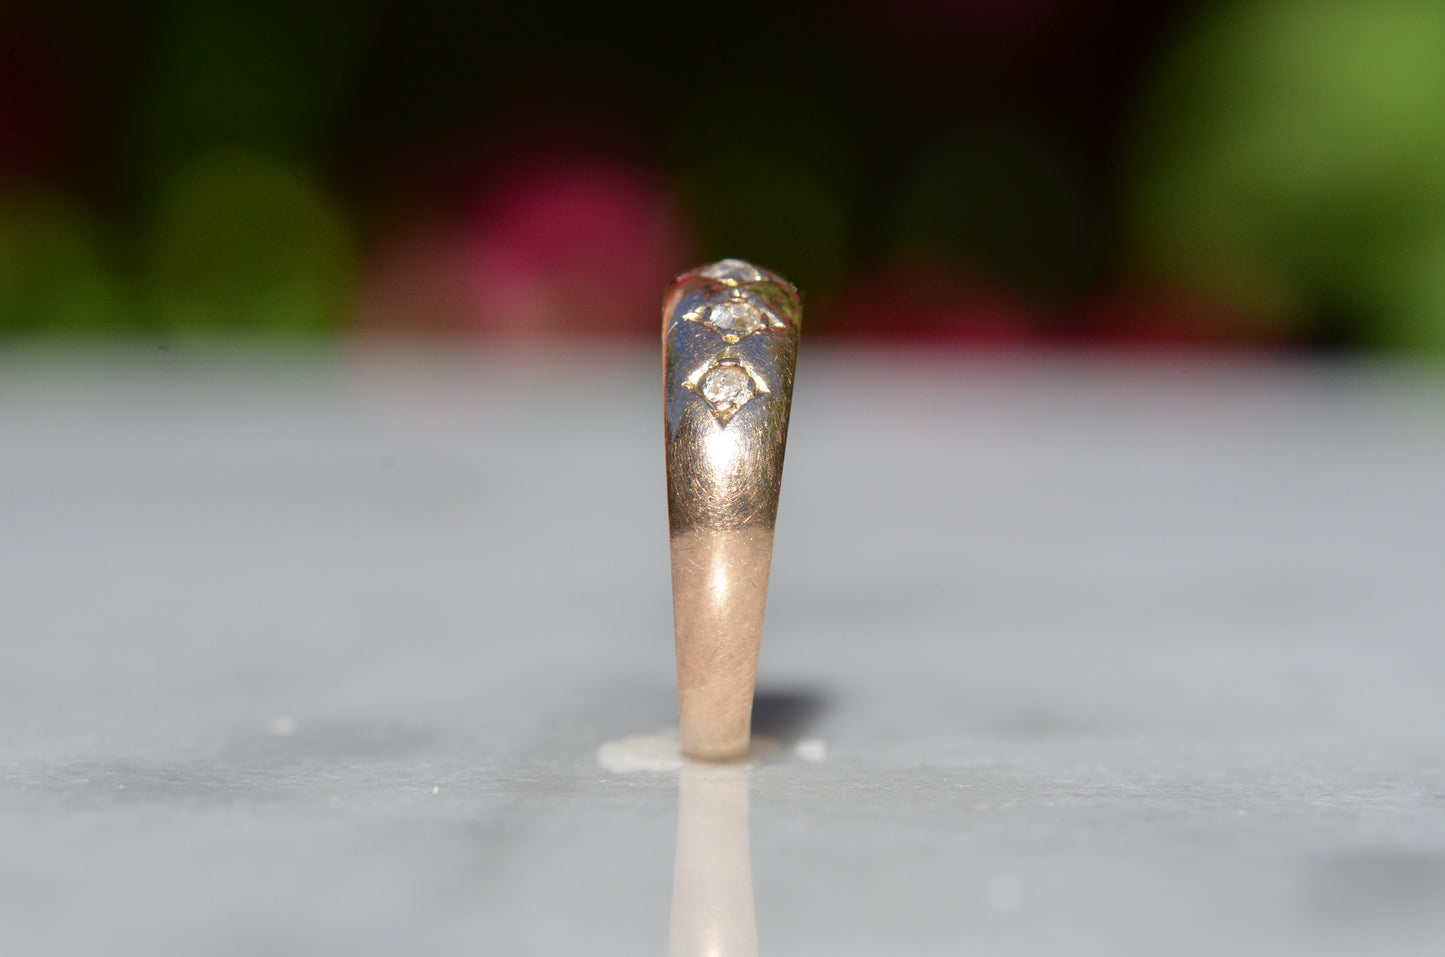 The ring is show positioned upright and from the side to highlight the tapered profile.